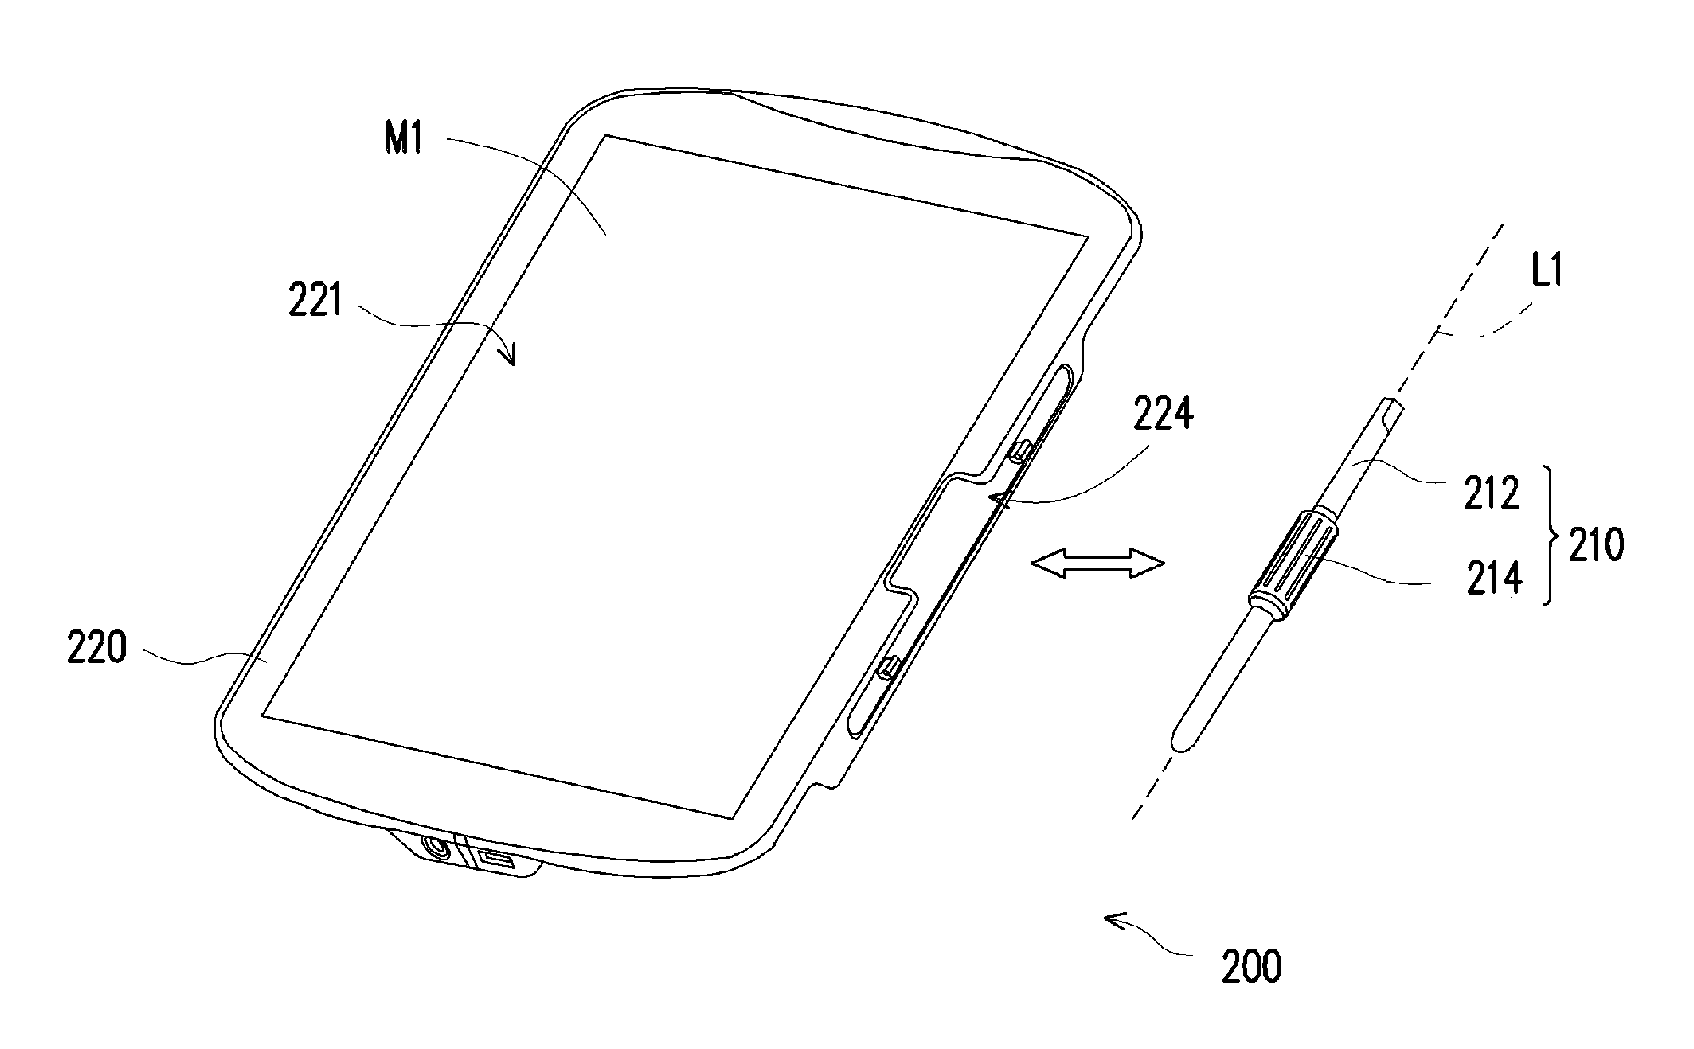 Stylus and electronic device